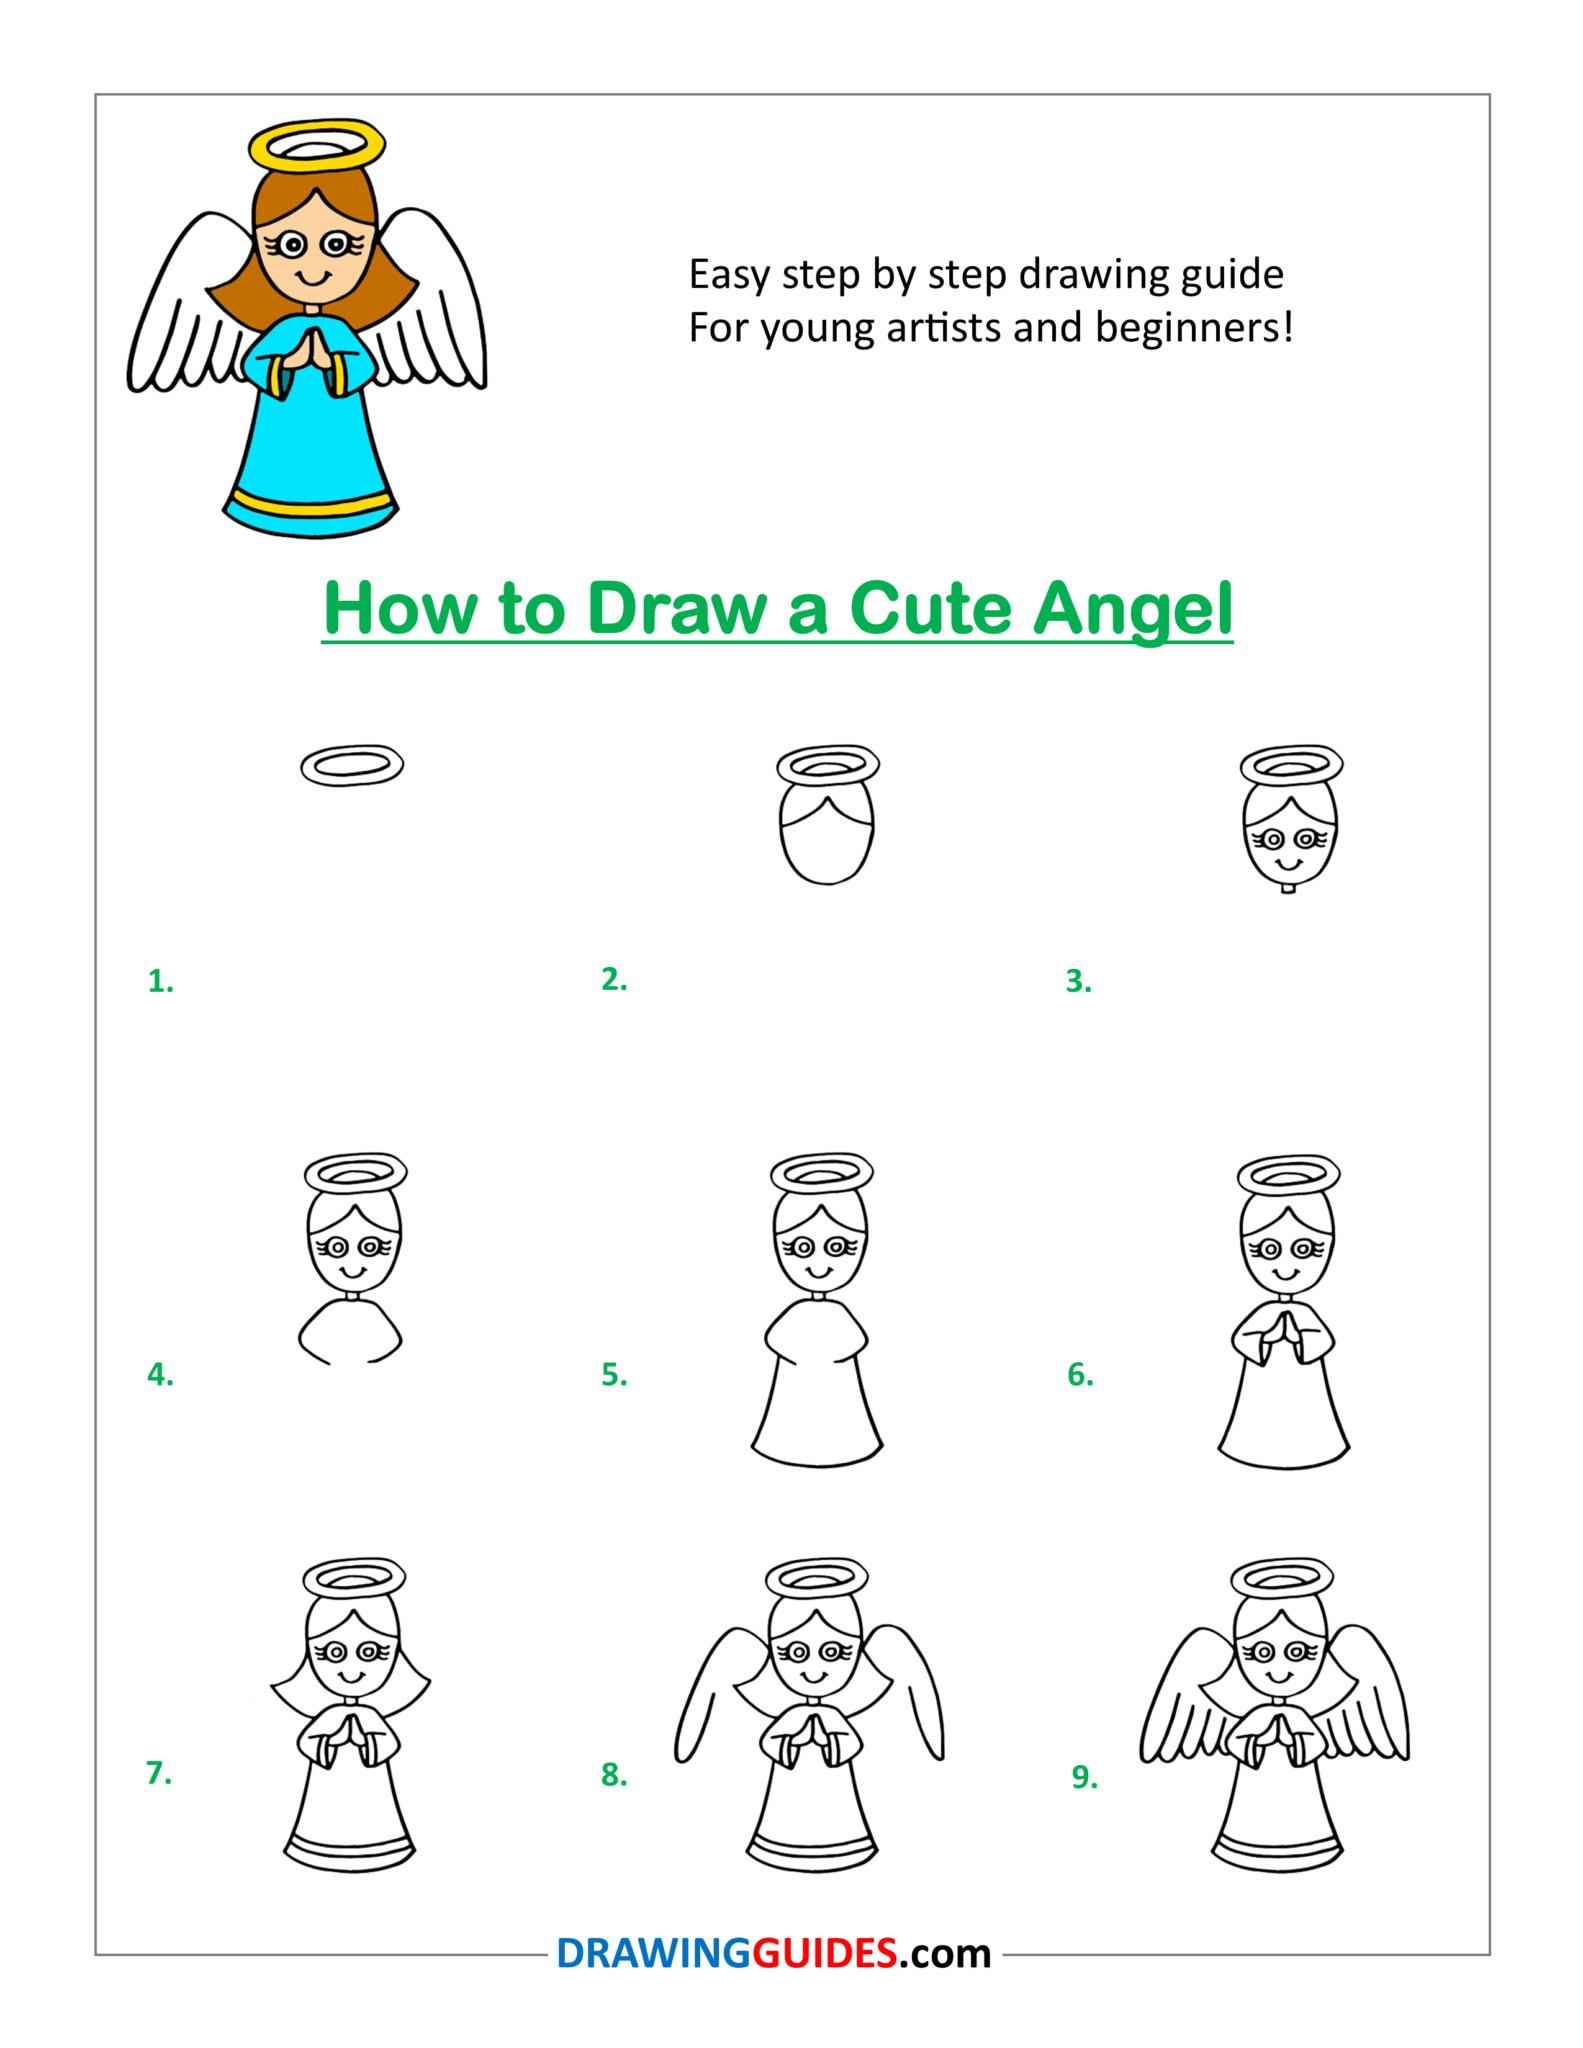 How to Draw an Angel Step by Step Drawing Guides for Everyone!